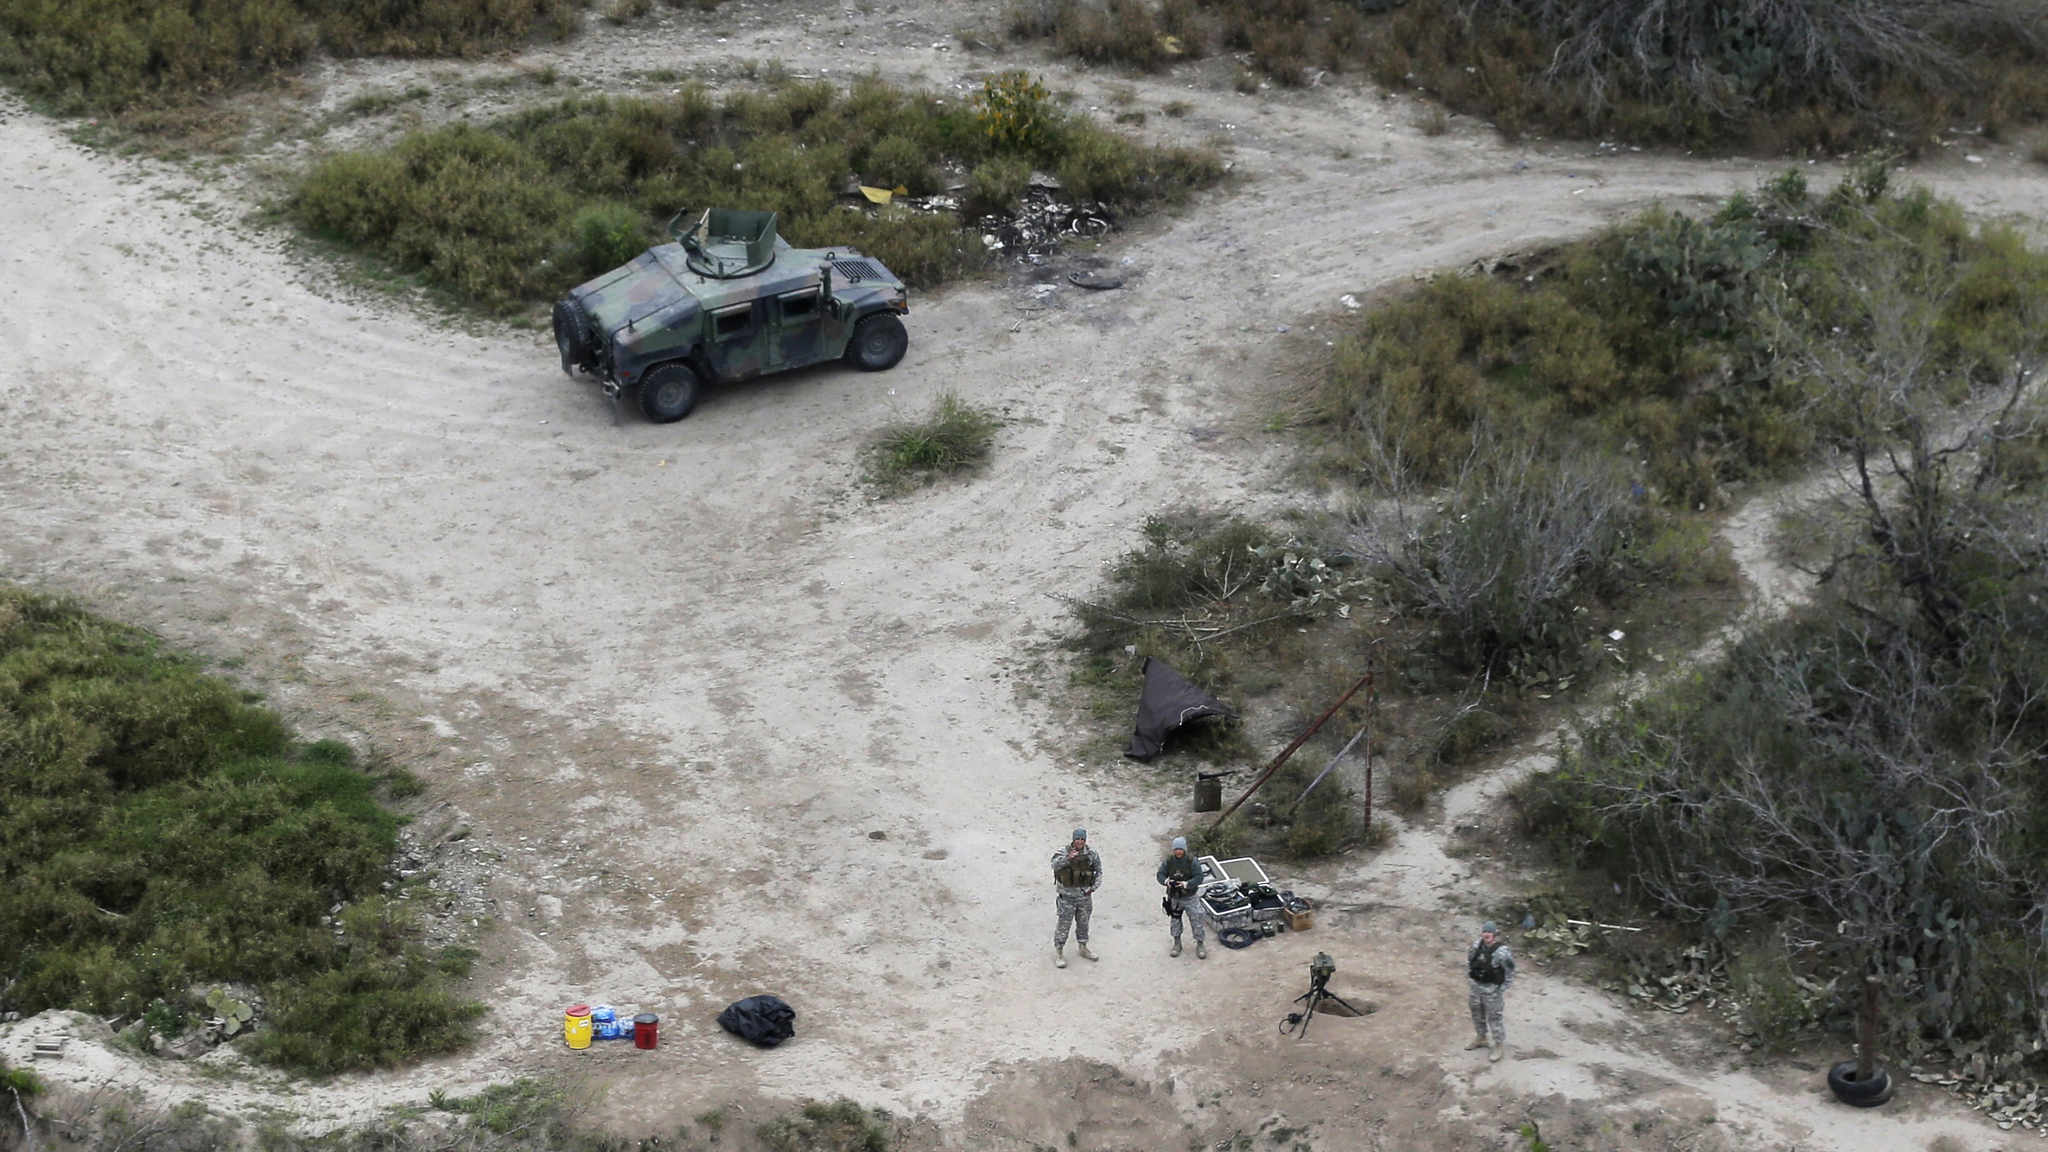 In this Feb. 24, 2015 photo, members of the National Guard patrol along the Rio Grande at the Texas-Mexico border in Rio Grande City, Texas. The Trump administration is considering a proposal to mobilize as many as 100,000 National Guard troops to round up unauthorized immigrants, including millions living nowhere near the Mexico border, according to a draft memo obtained by The Associated Press. (Eric Gay | The Associated Press file)